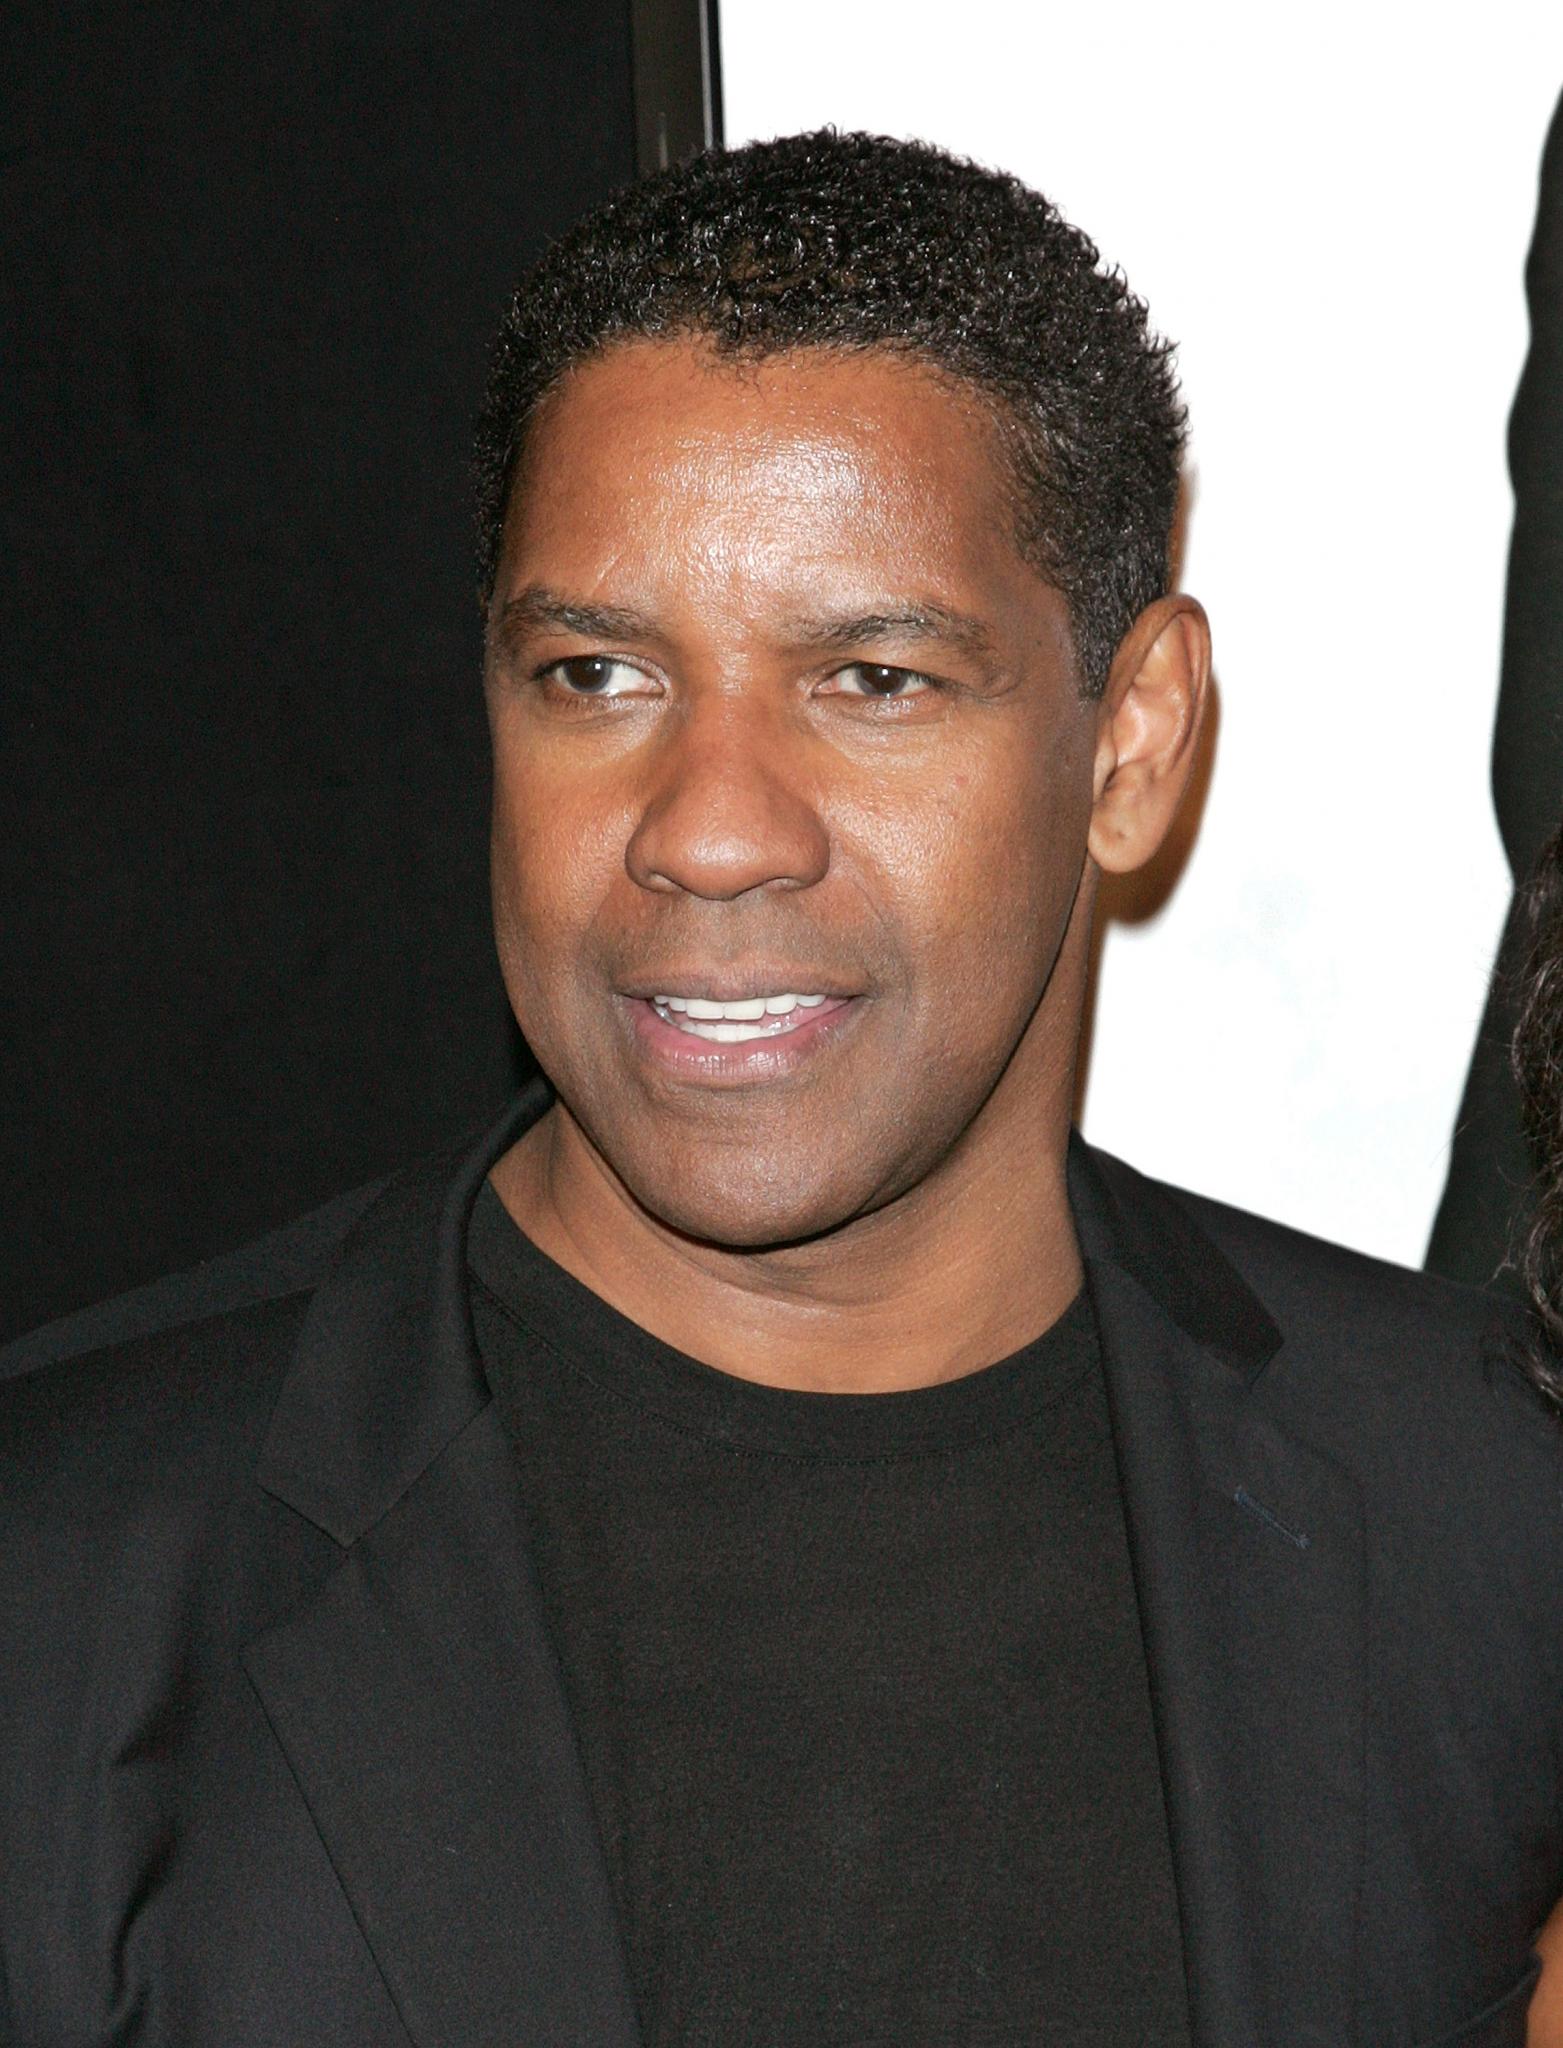 Denzel Washington to Be Honored With Cecil B. DeMille Award at Golden Globes